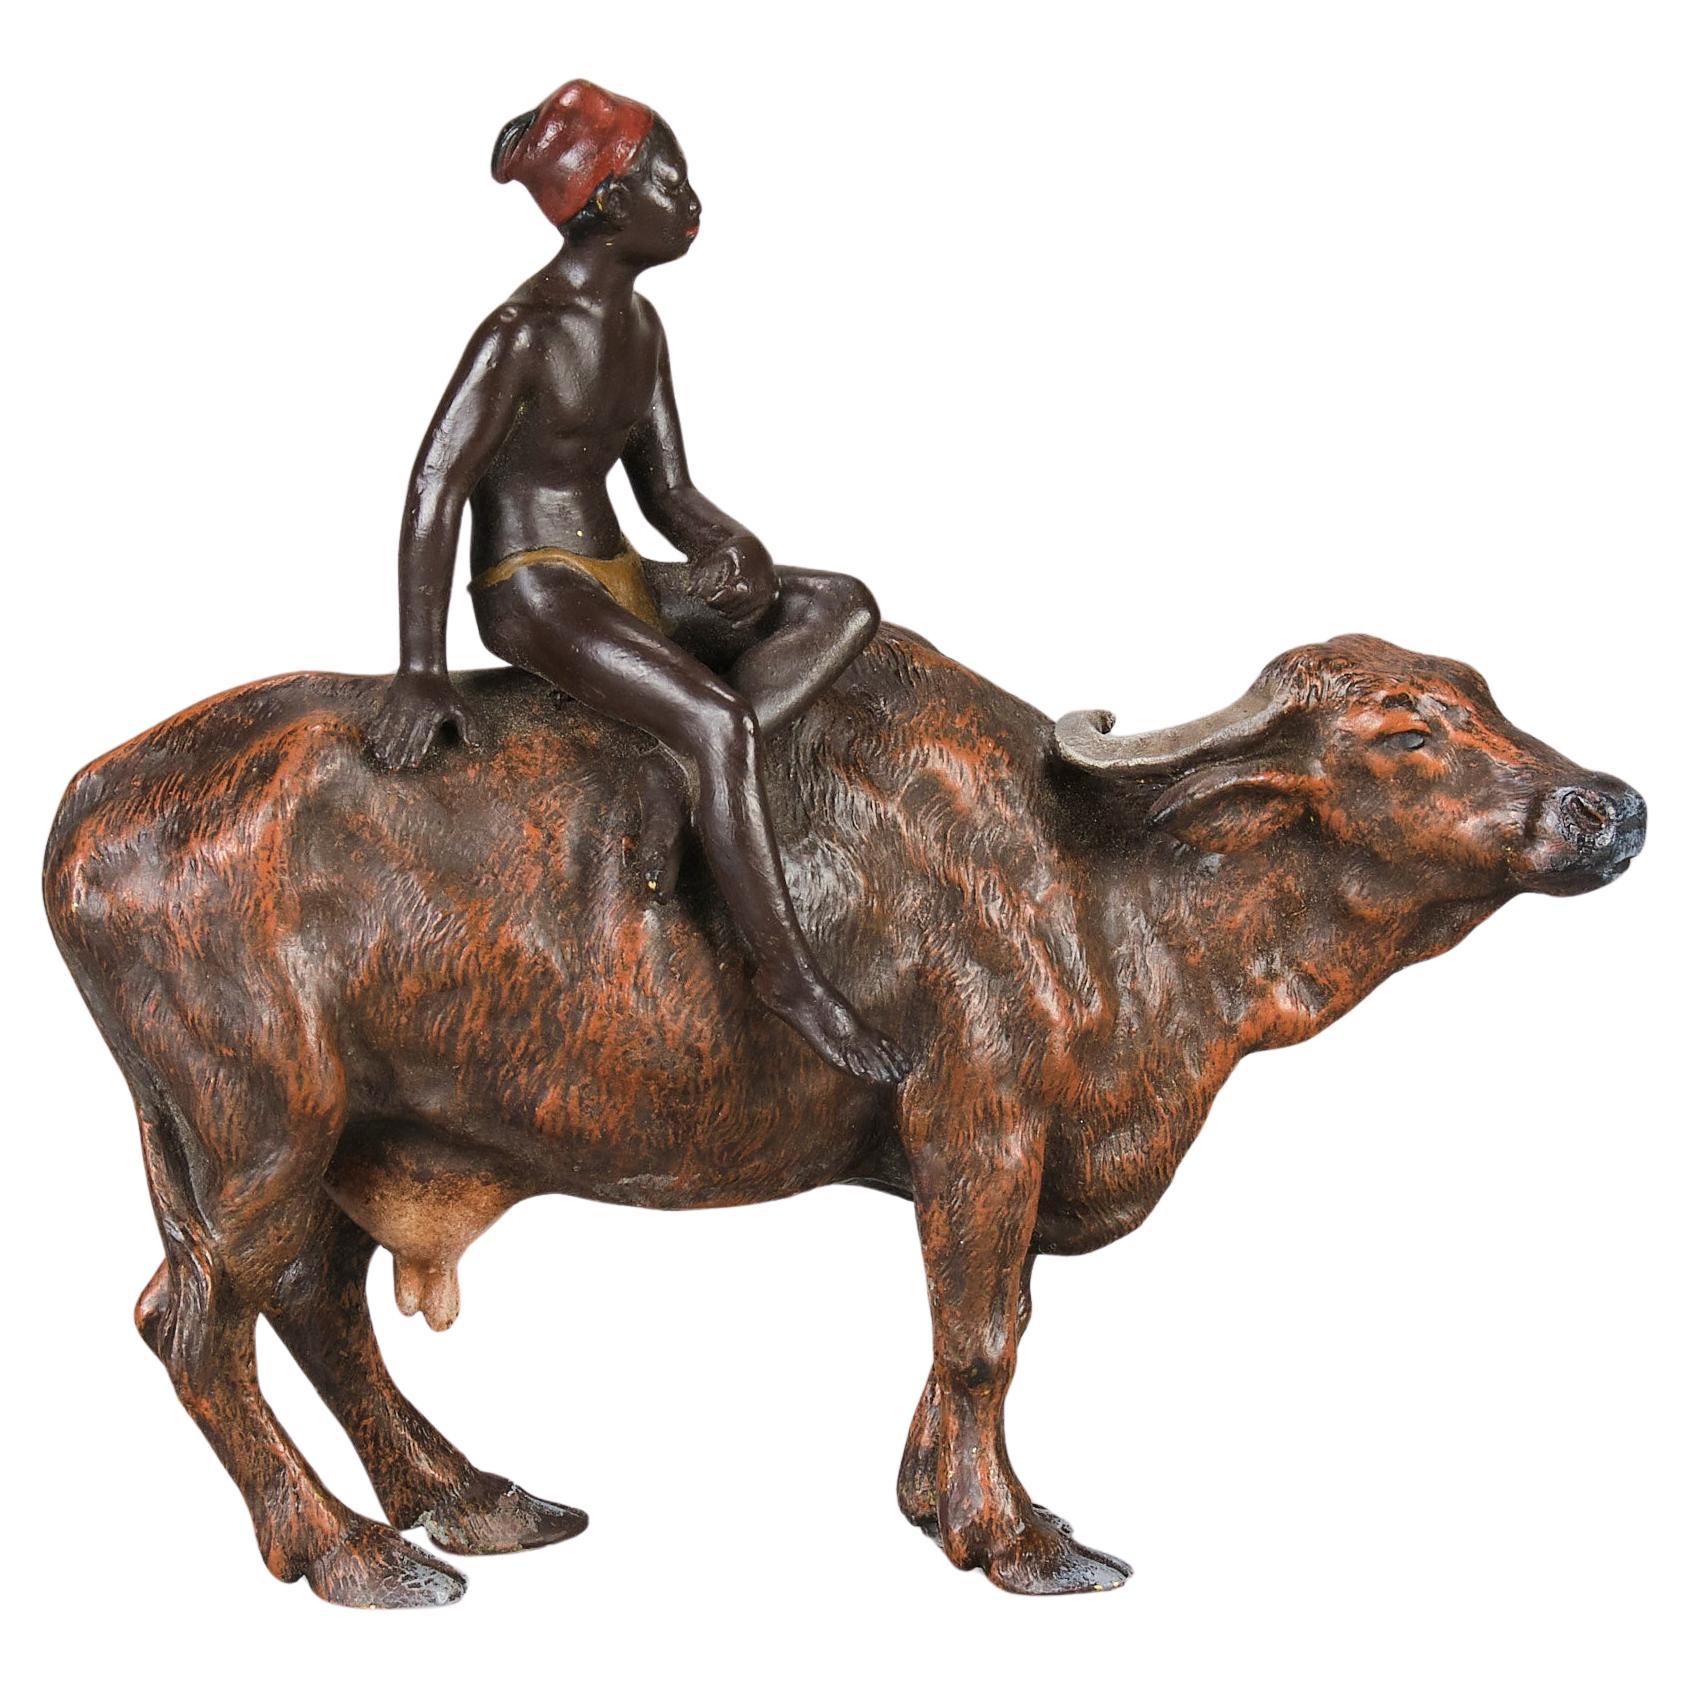 Early 20th Century Cold-Painted Bronze Sculpture "Boy on Ox" by Franz Bergman For Sale